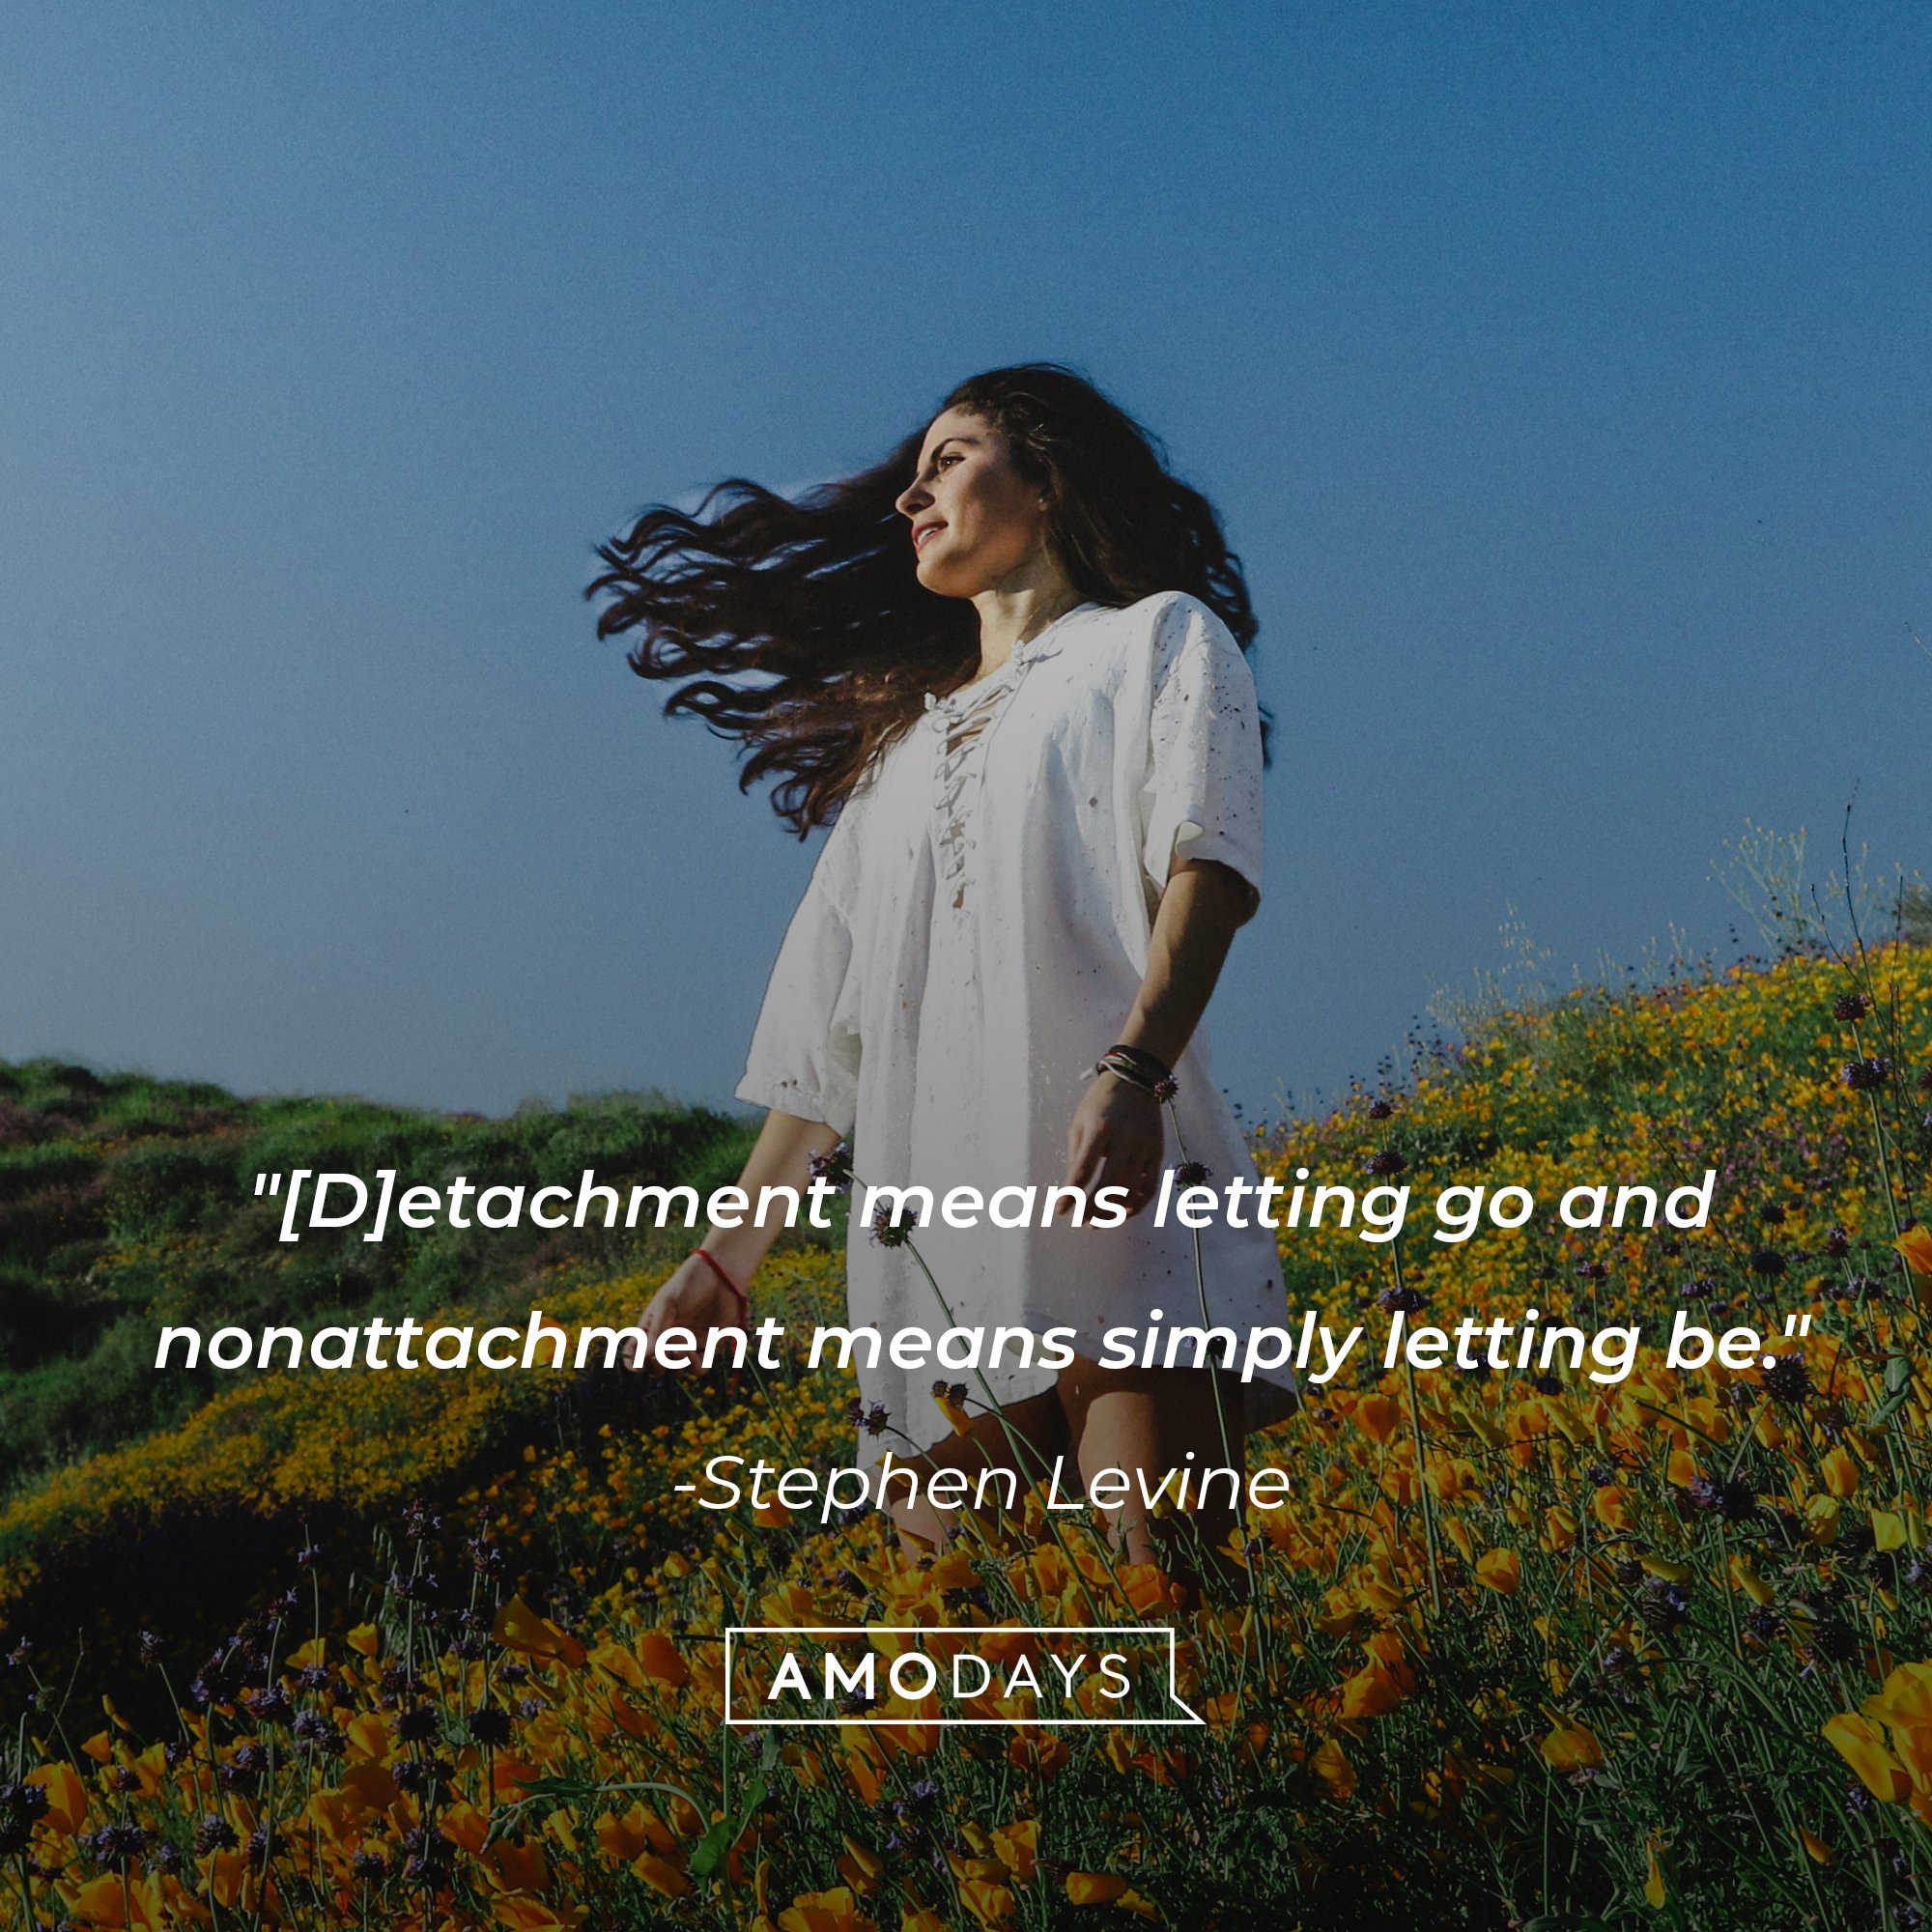 Stephen Levine's quote: "[D]etachment means letting go and nonattachment means simply letting be." | Image: AmoDays